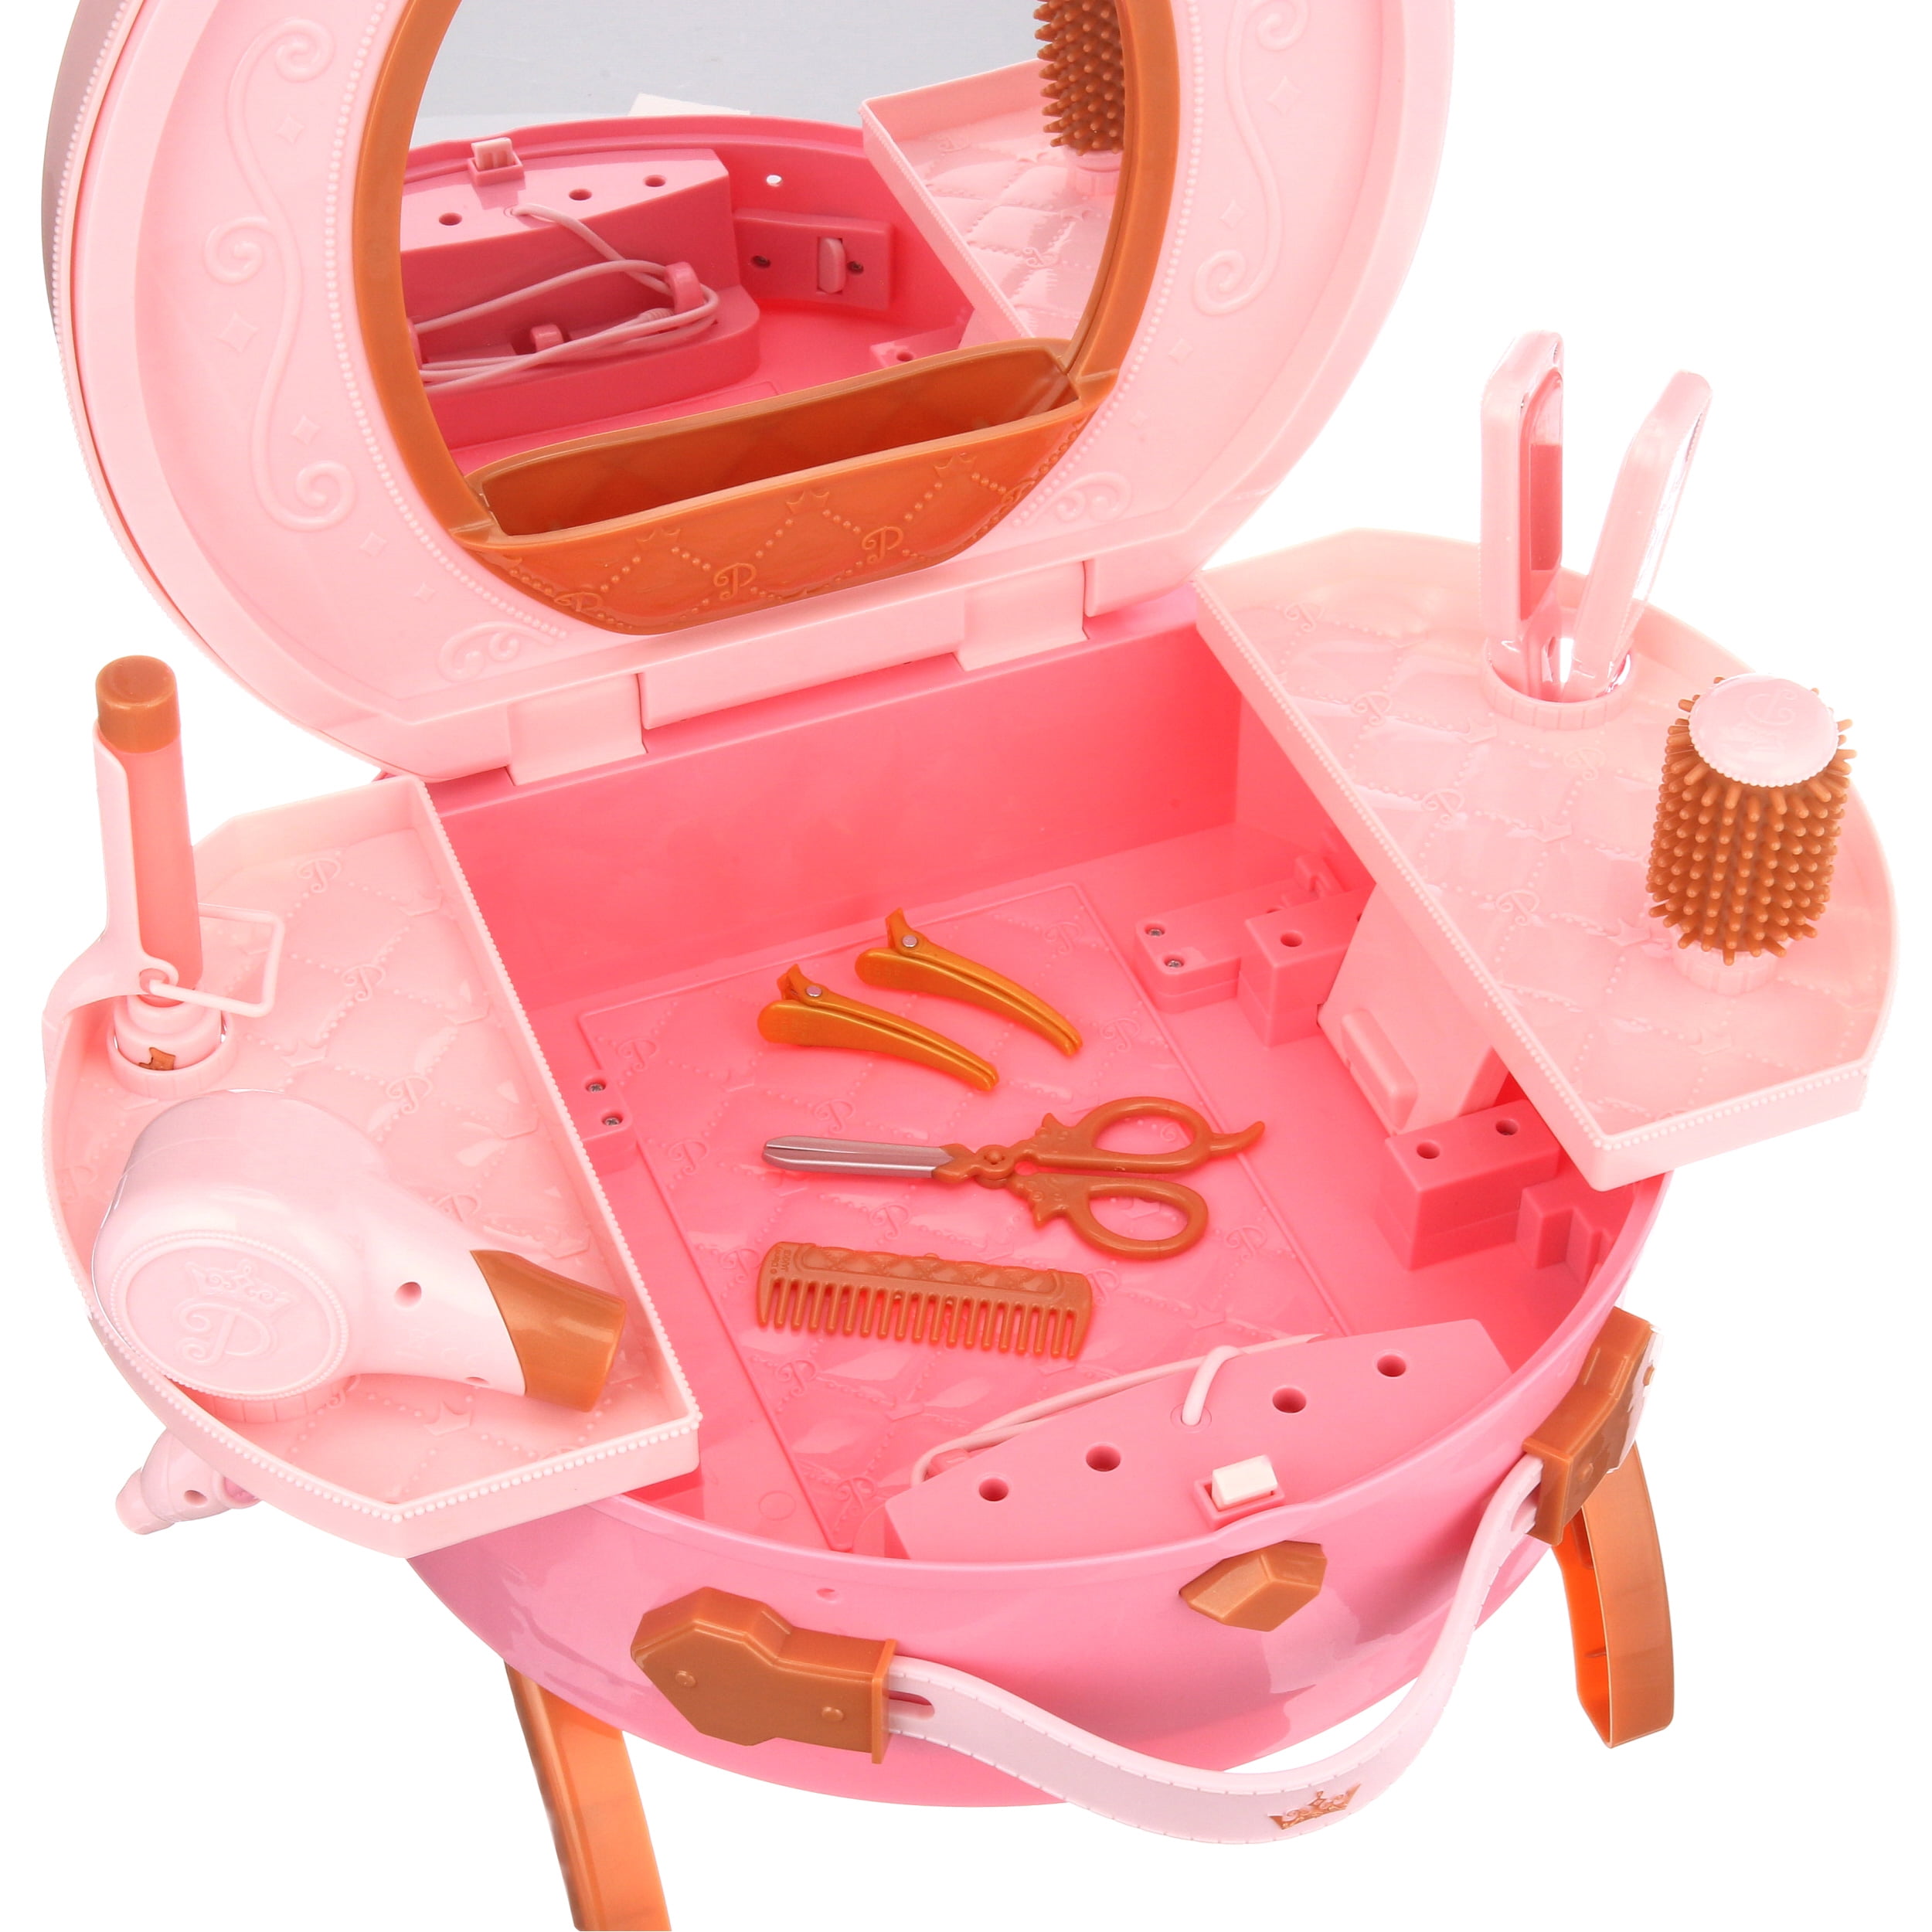 Disney Princess Style Collection Vanity, Fashion & Adventure Dolls With  Playsets